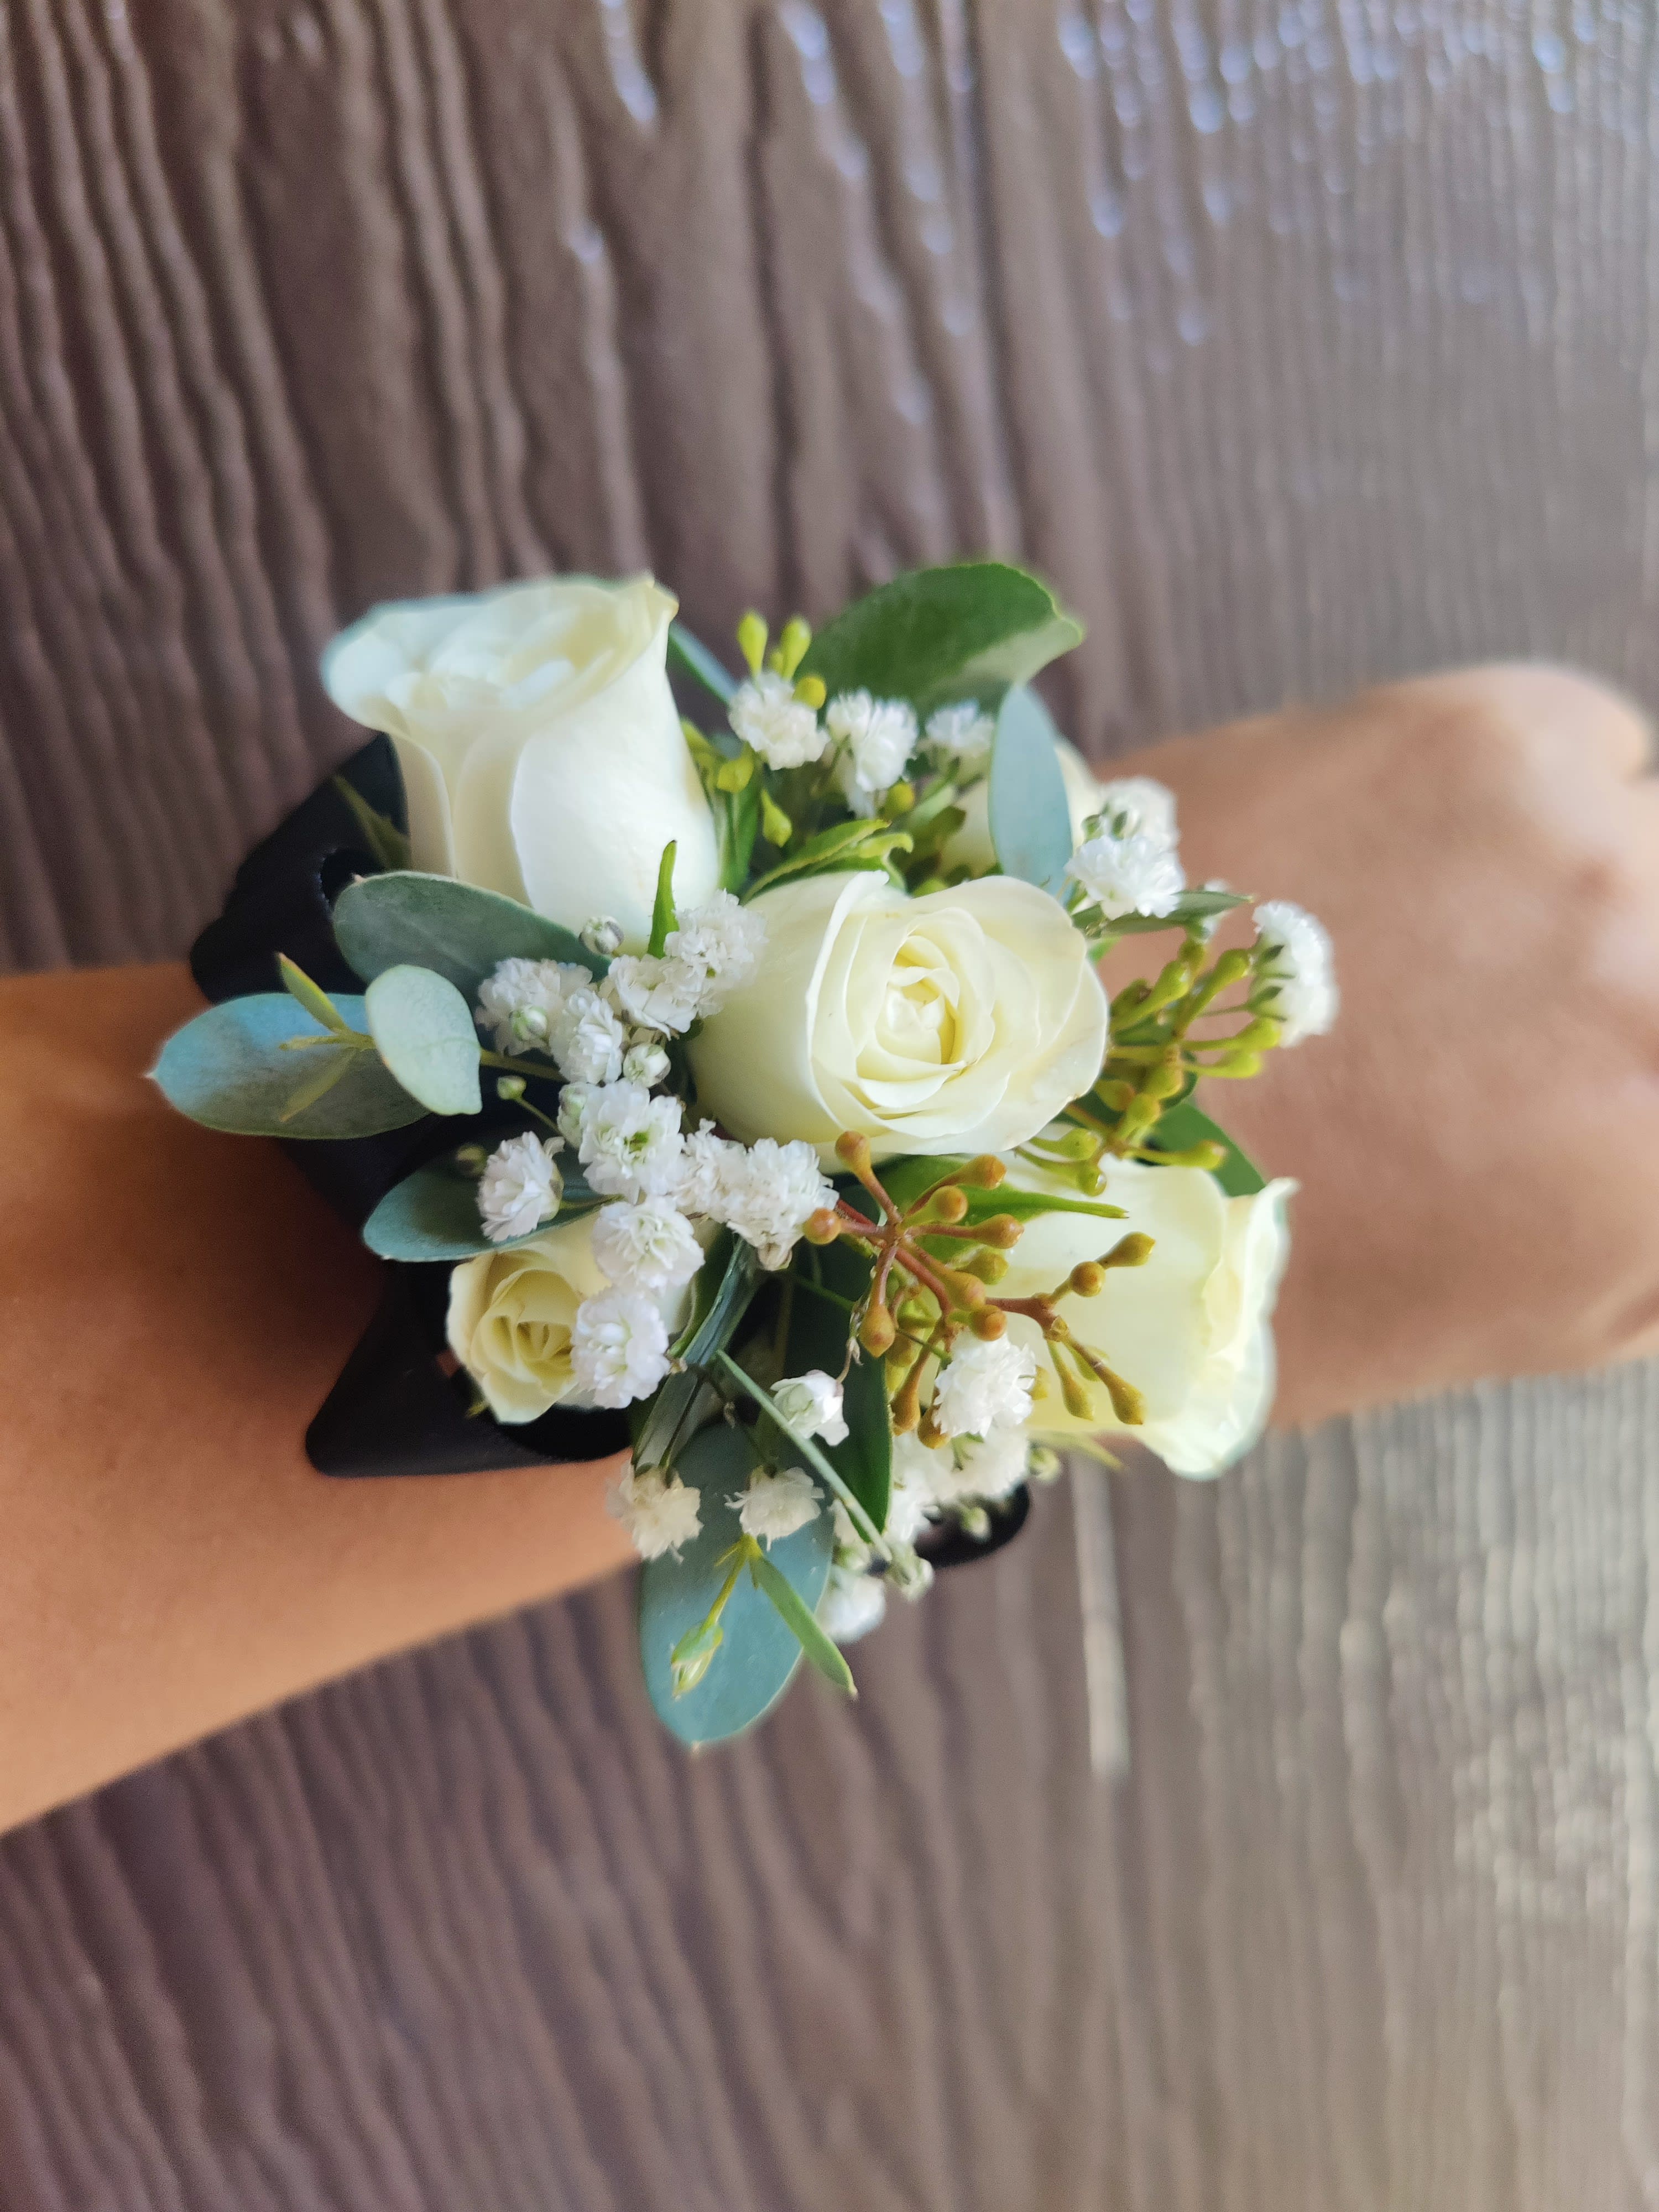 Prom Homecoming Dance Corsage Bracelet in Costa Mesa, CA